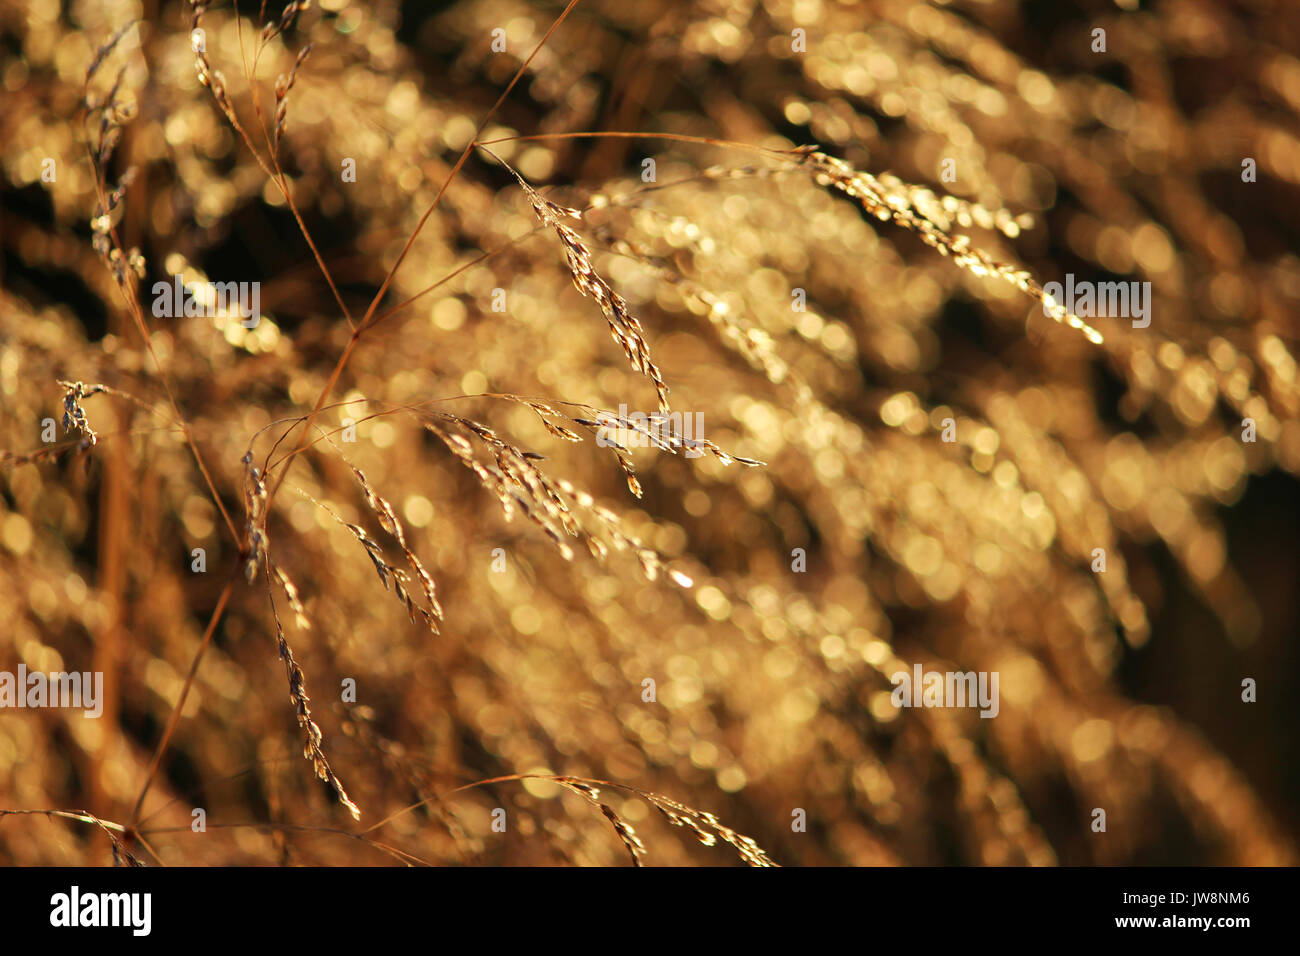 Bluegrass meadow Poa pratensis in the golden glow of the setting summer sun. Stock Photo